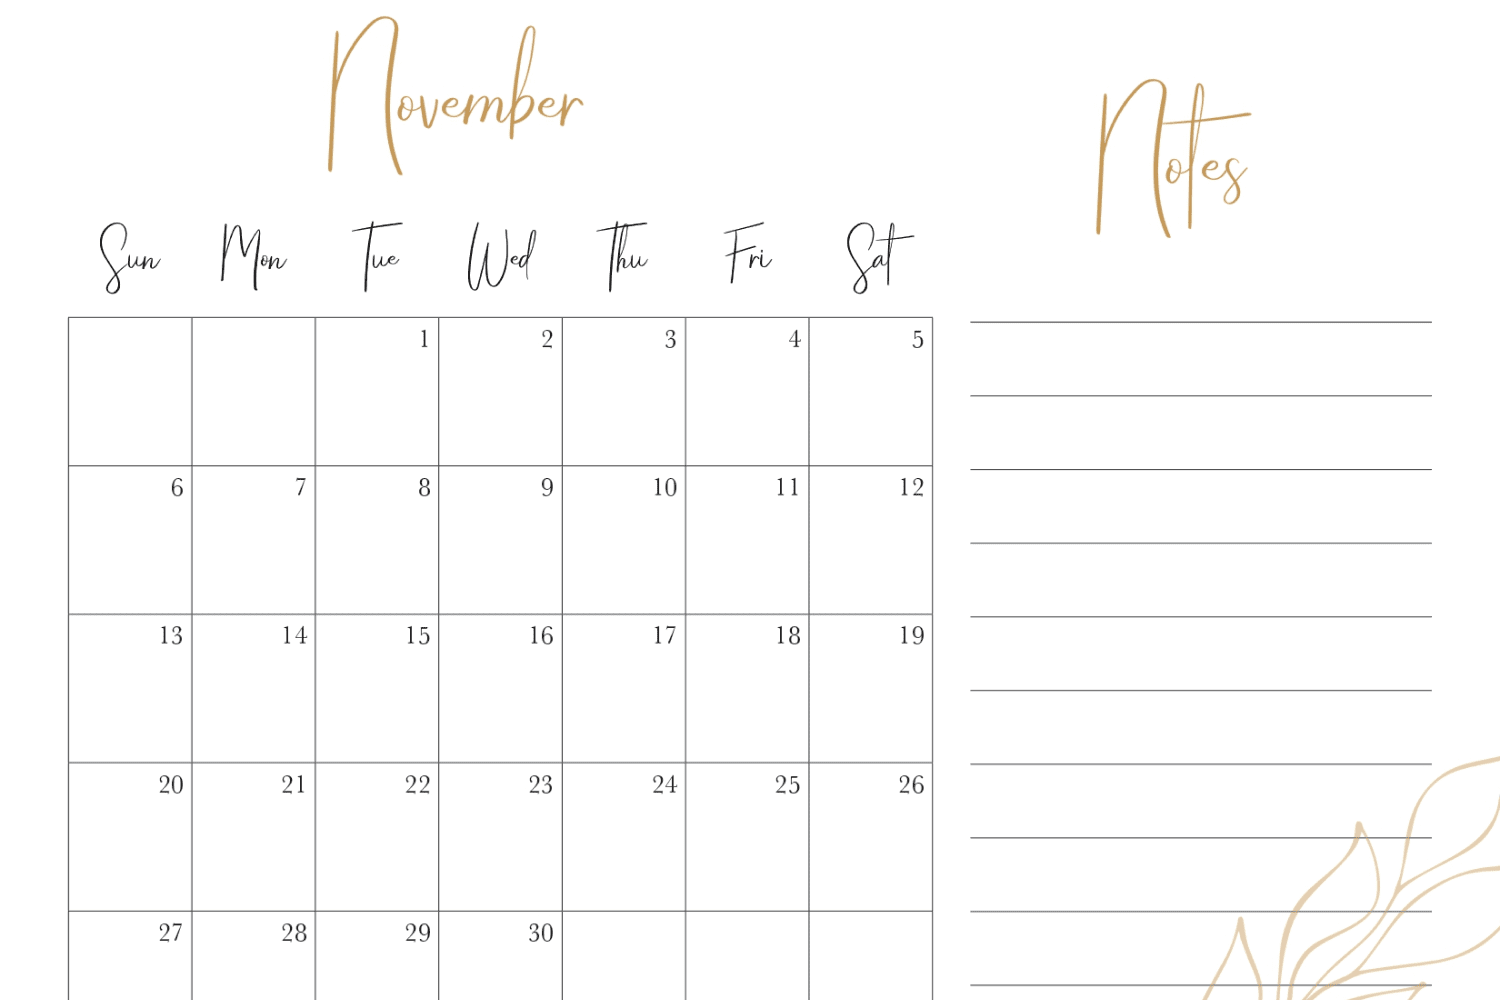 November calendar with white background and spaces for notes.